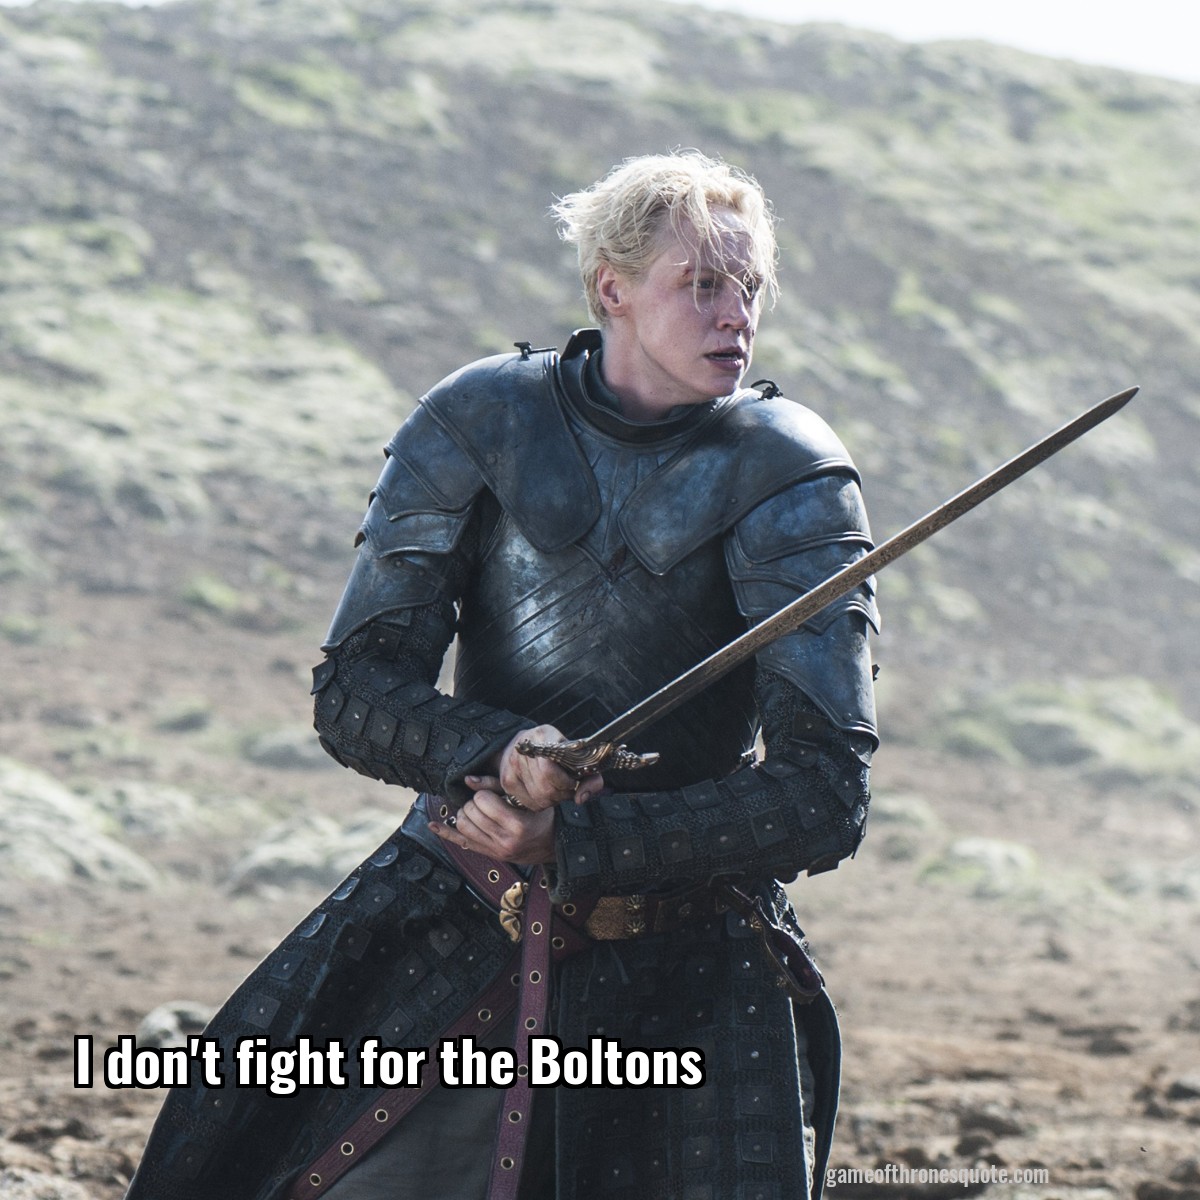 I don't fight for the Boltons